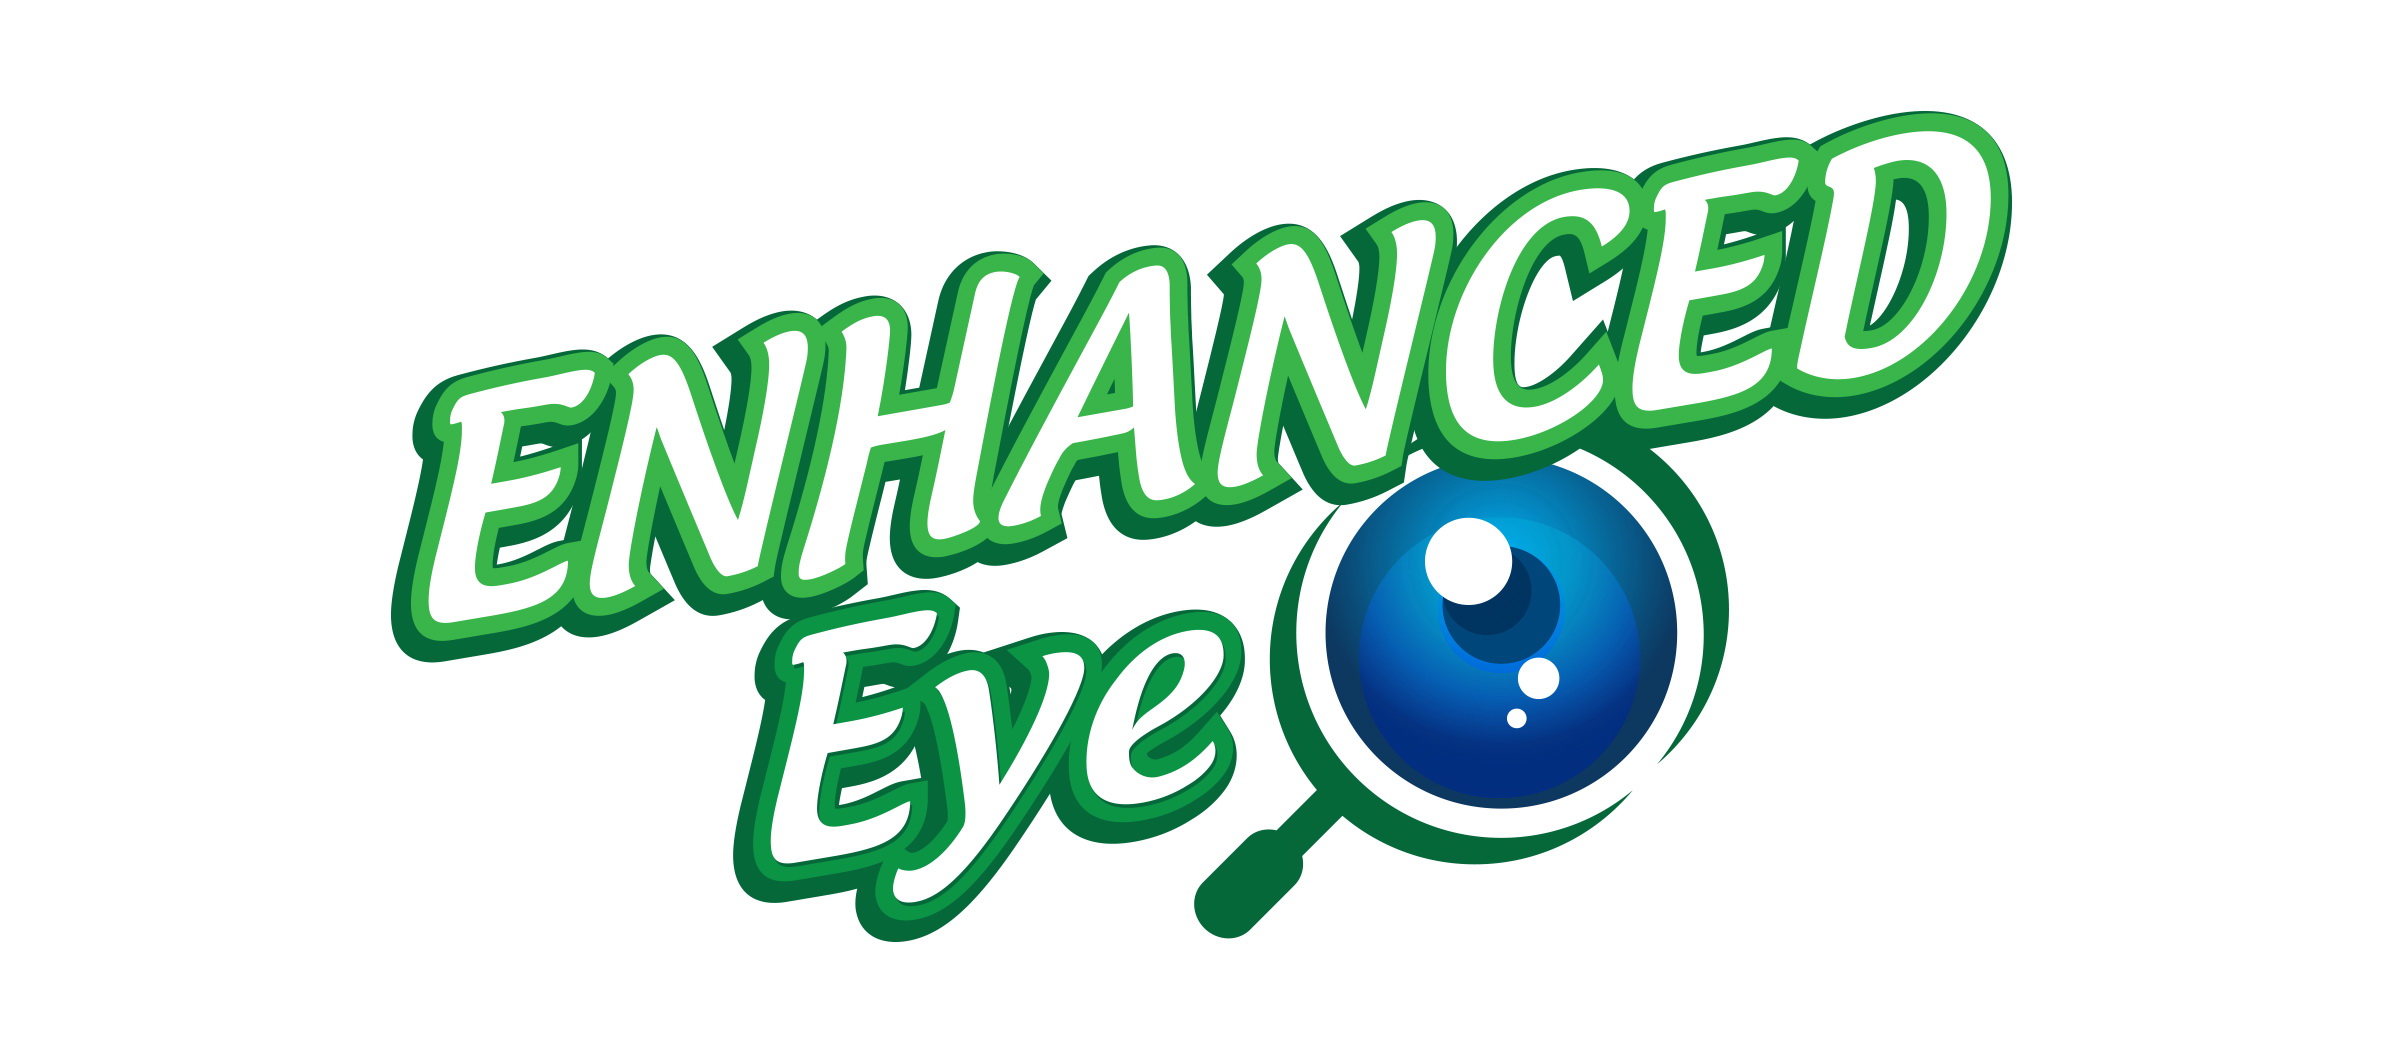 The Enhanced Eye is a household invention that makes product labels easier and more convenient to read.